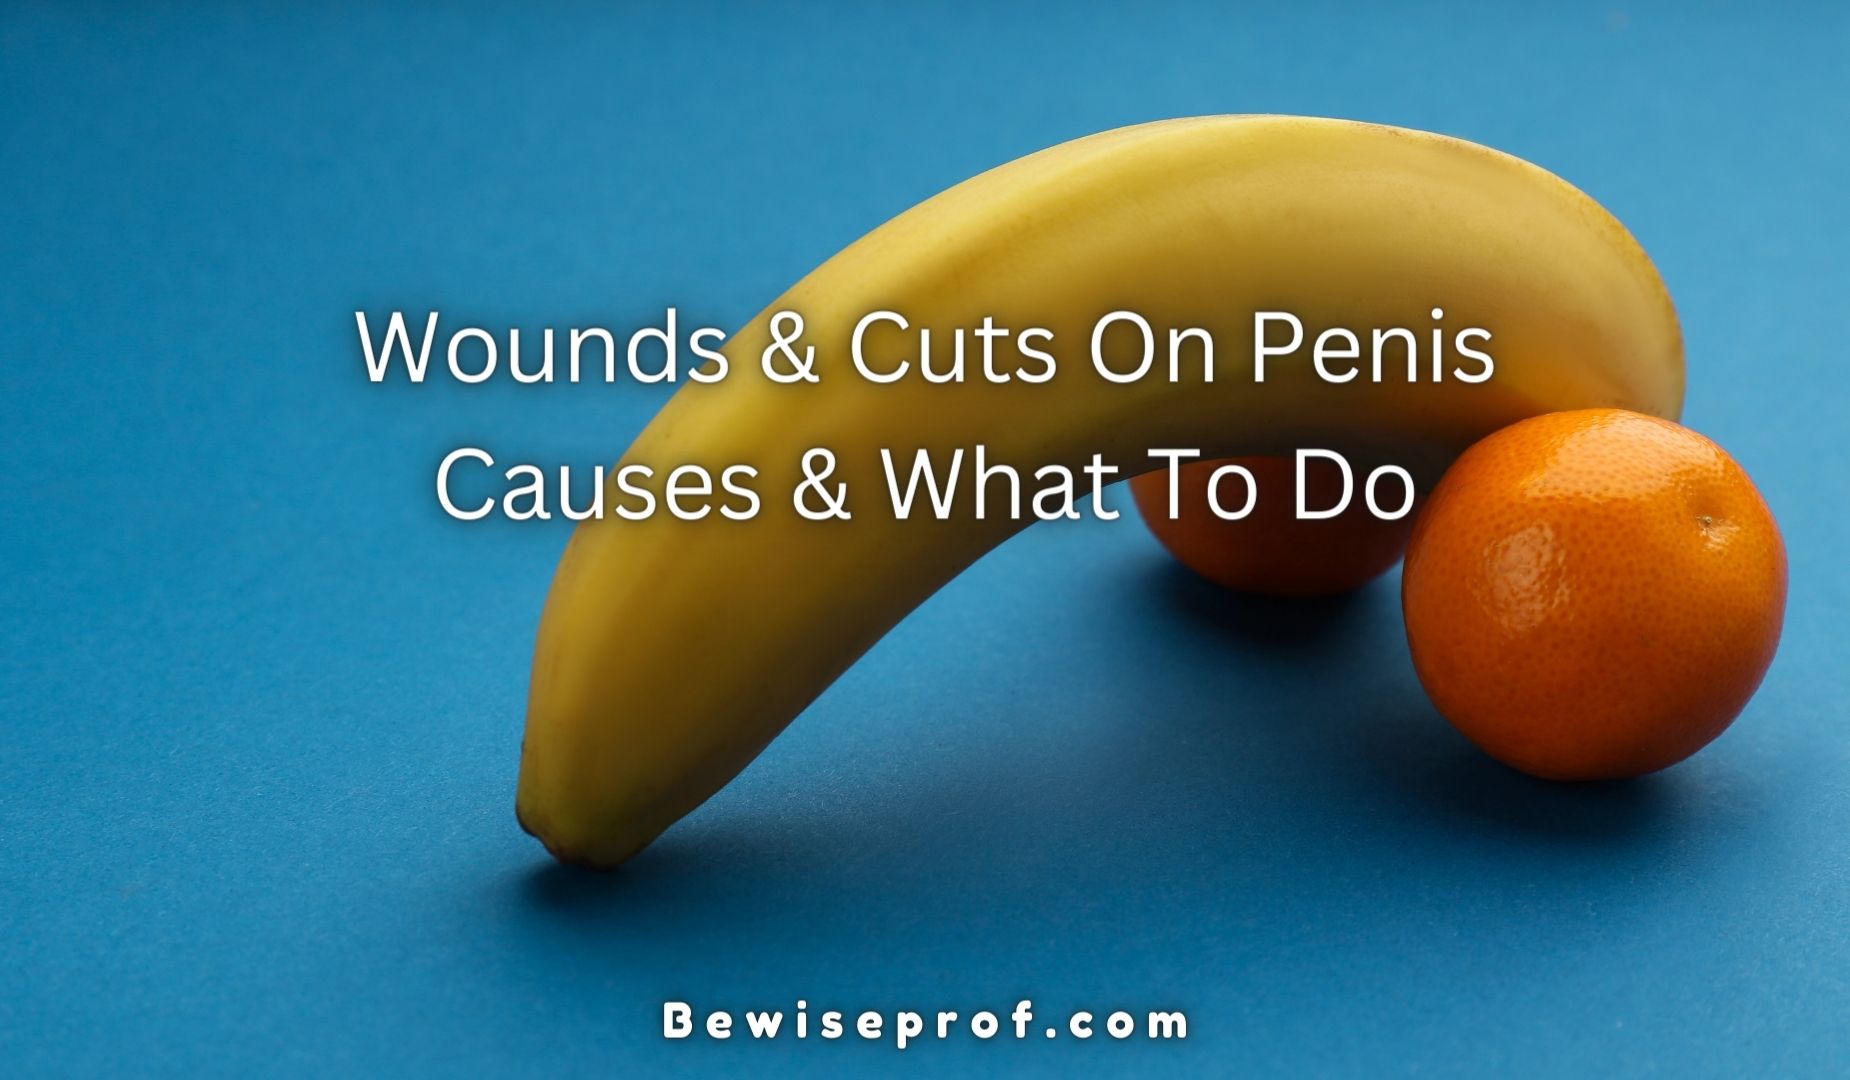 Wounds & Cuts On Penis